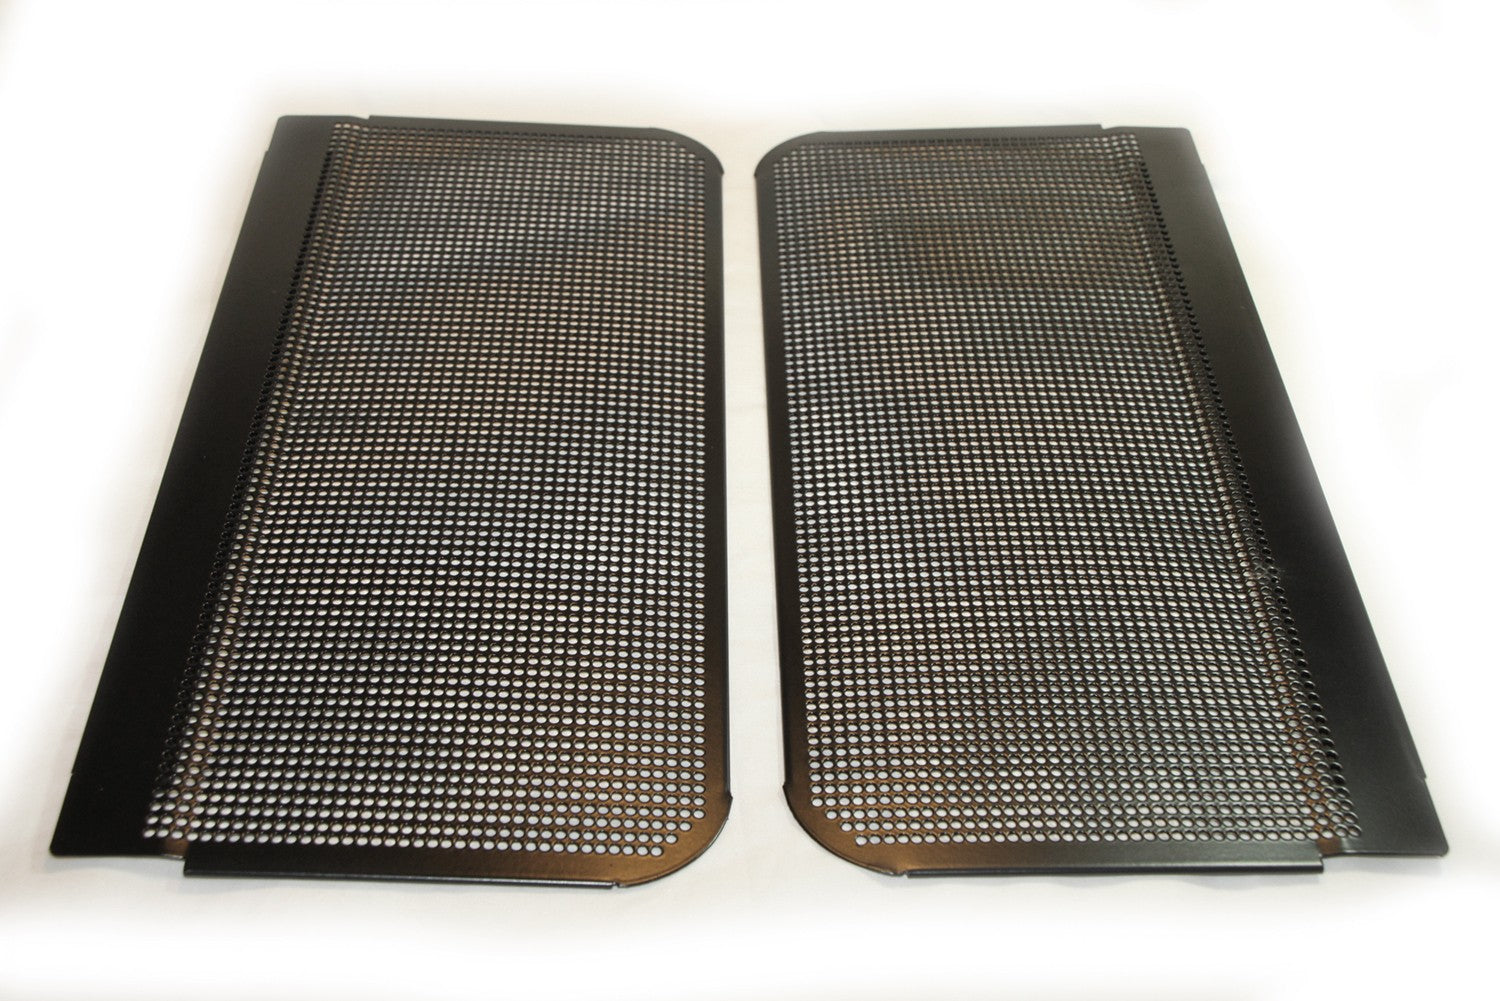 Station Wagon Rear Window Security Screens - for Land Rover 90/110 (set of 2)